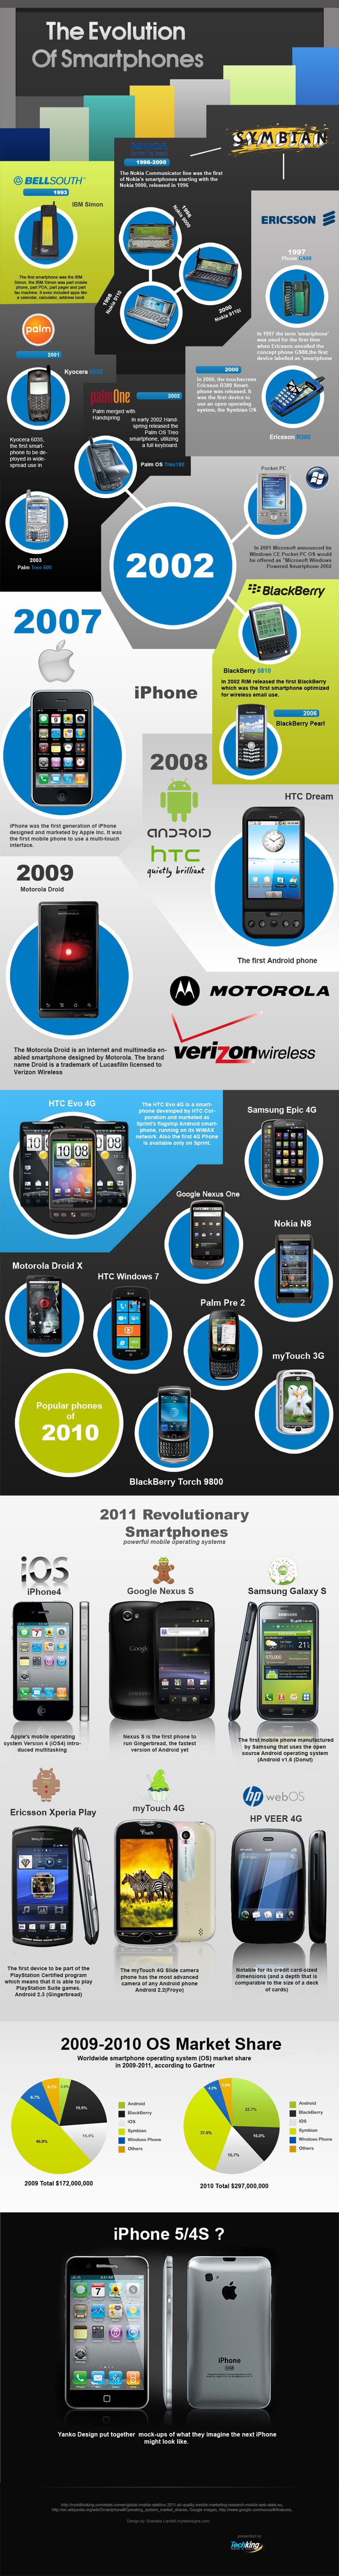 The History Of Smartphones Infographic